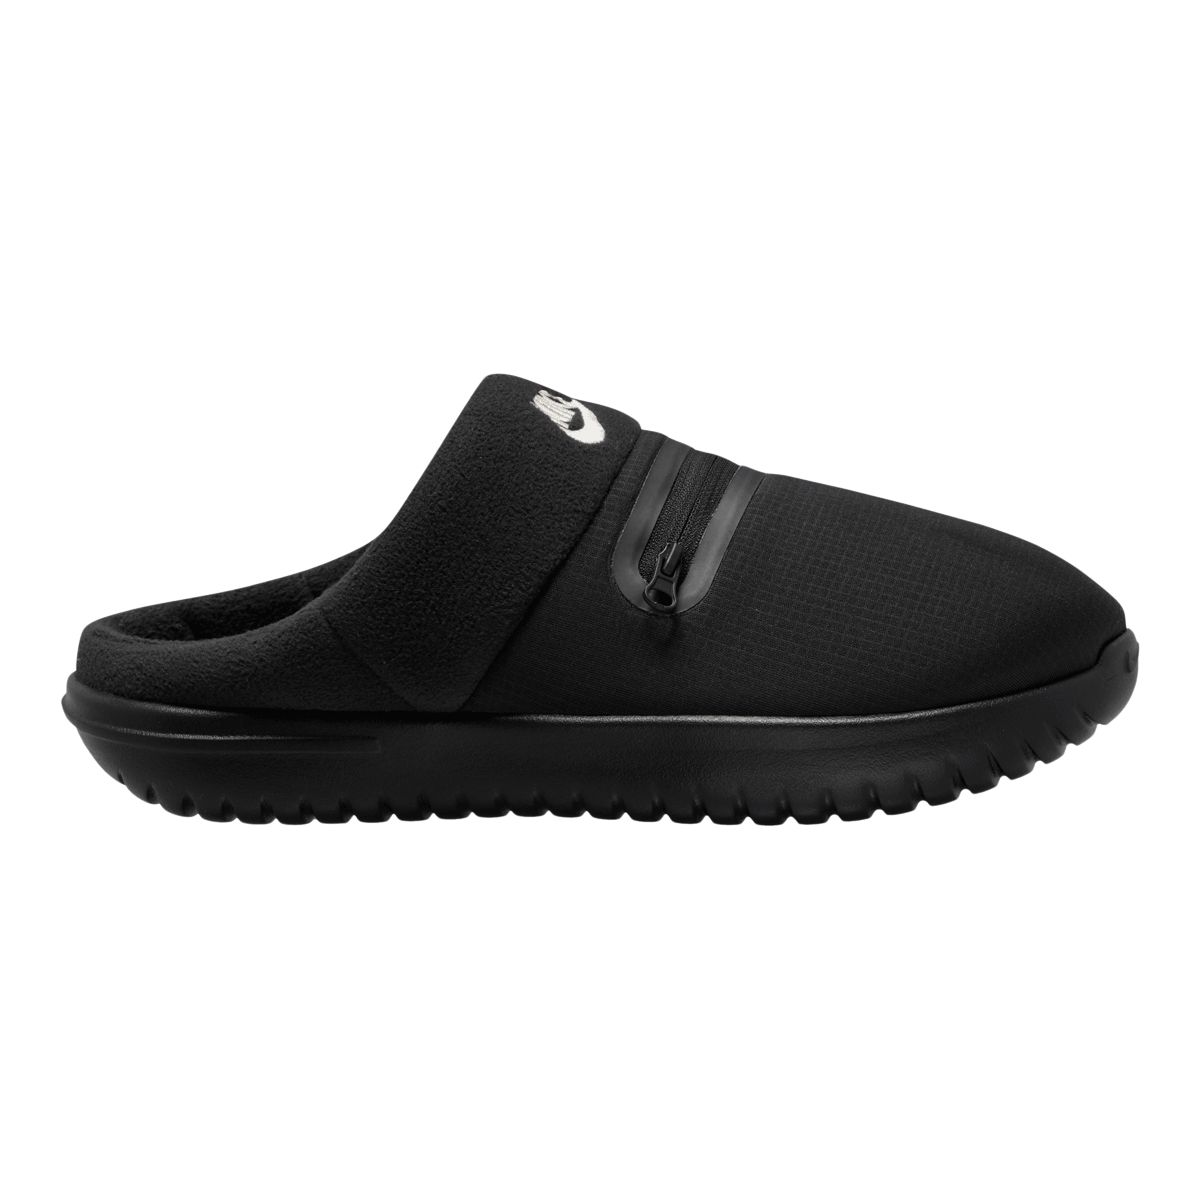 The Perfect Sneaker Slippers - Shop on AliExpress for Satisfaction  Guaranteed and Free Shipping!